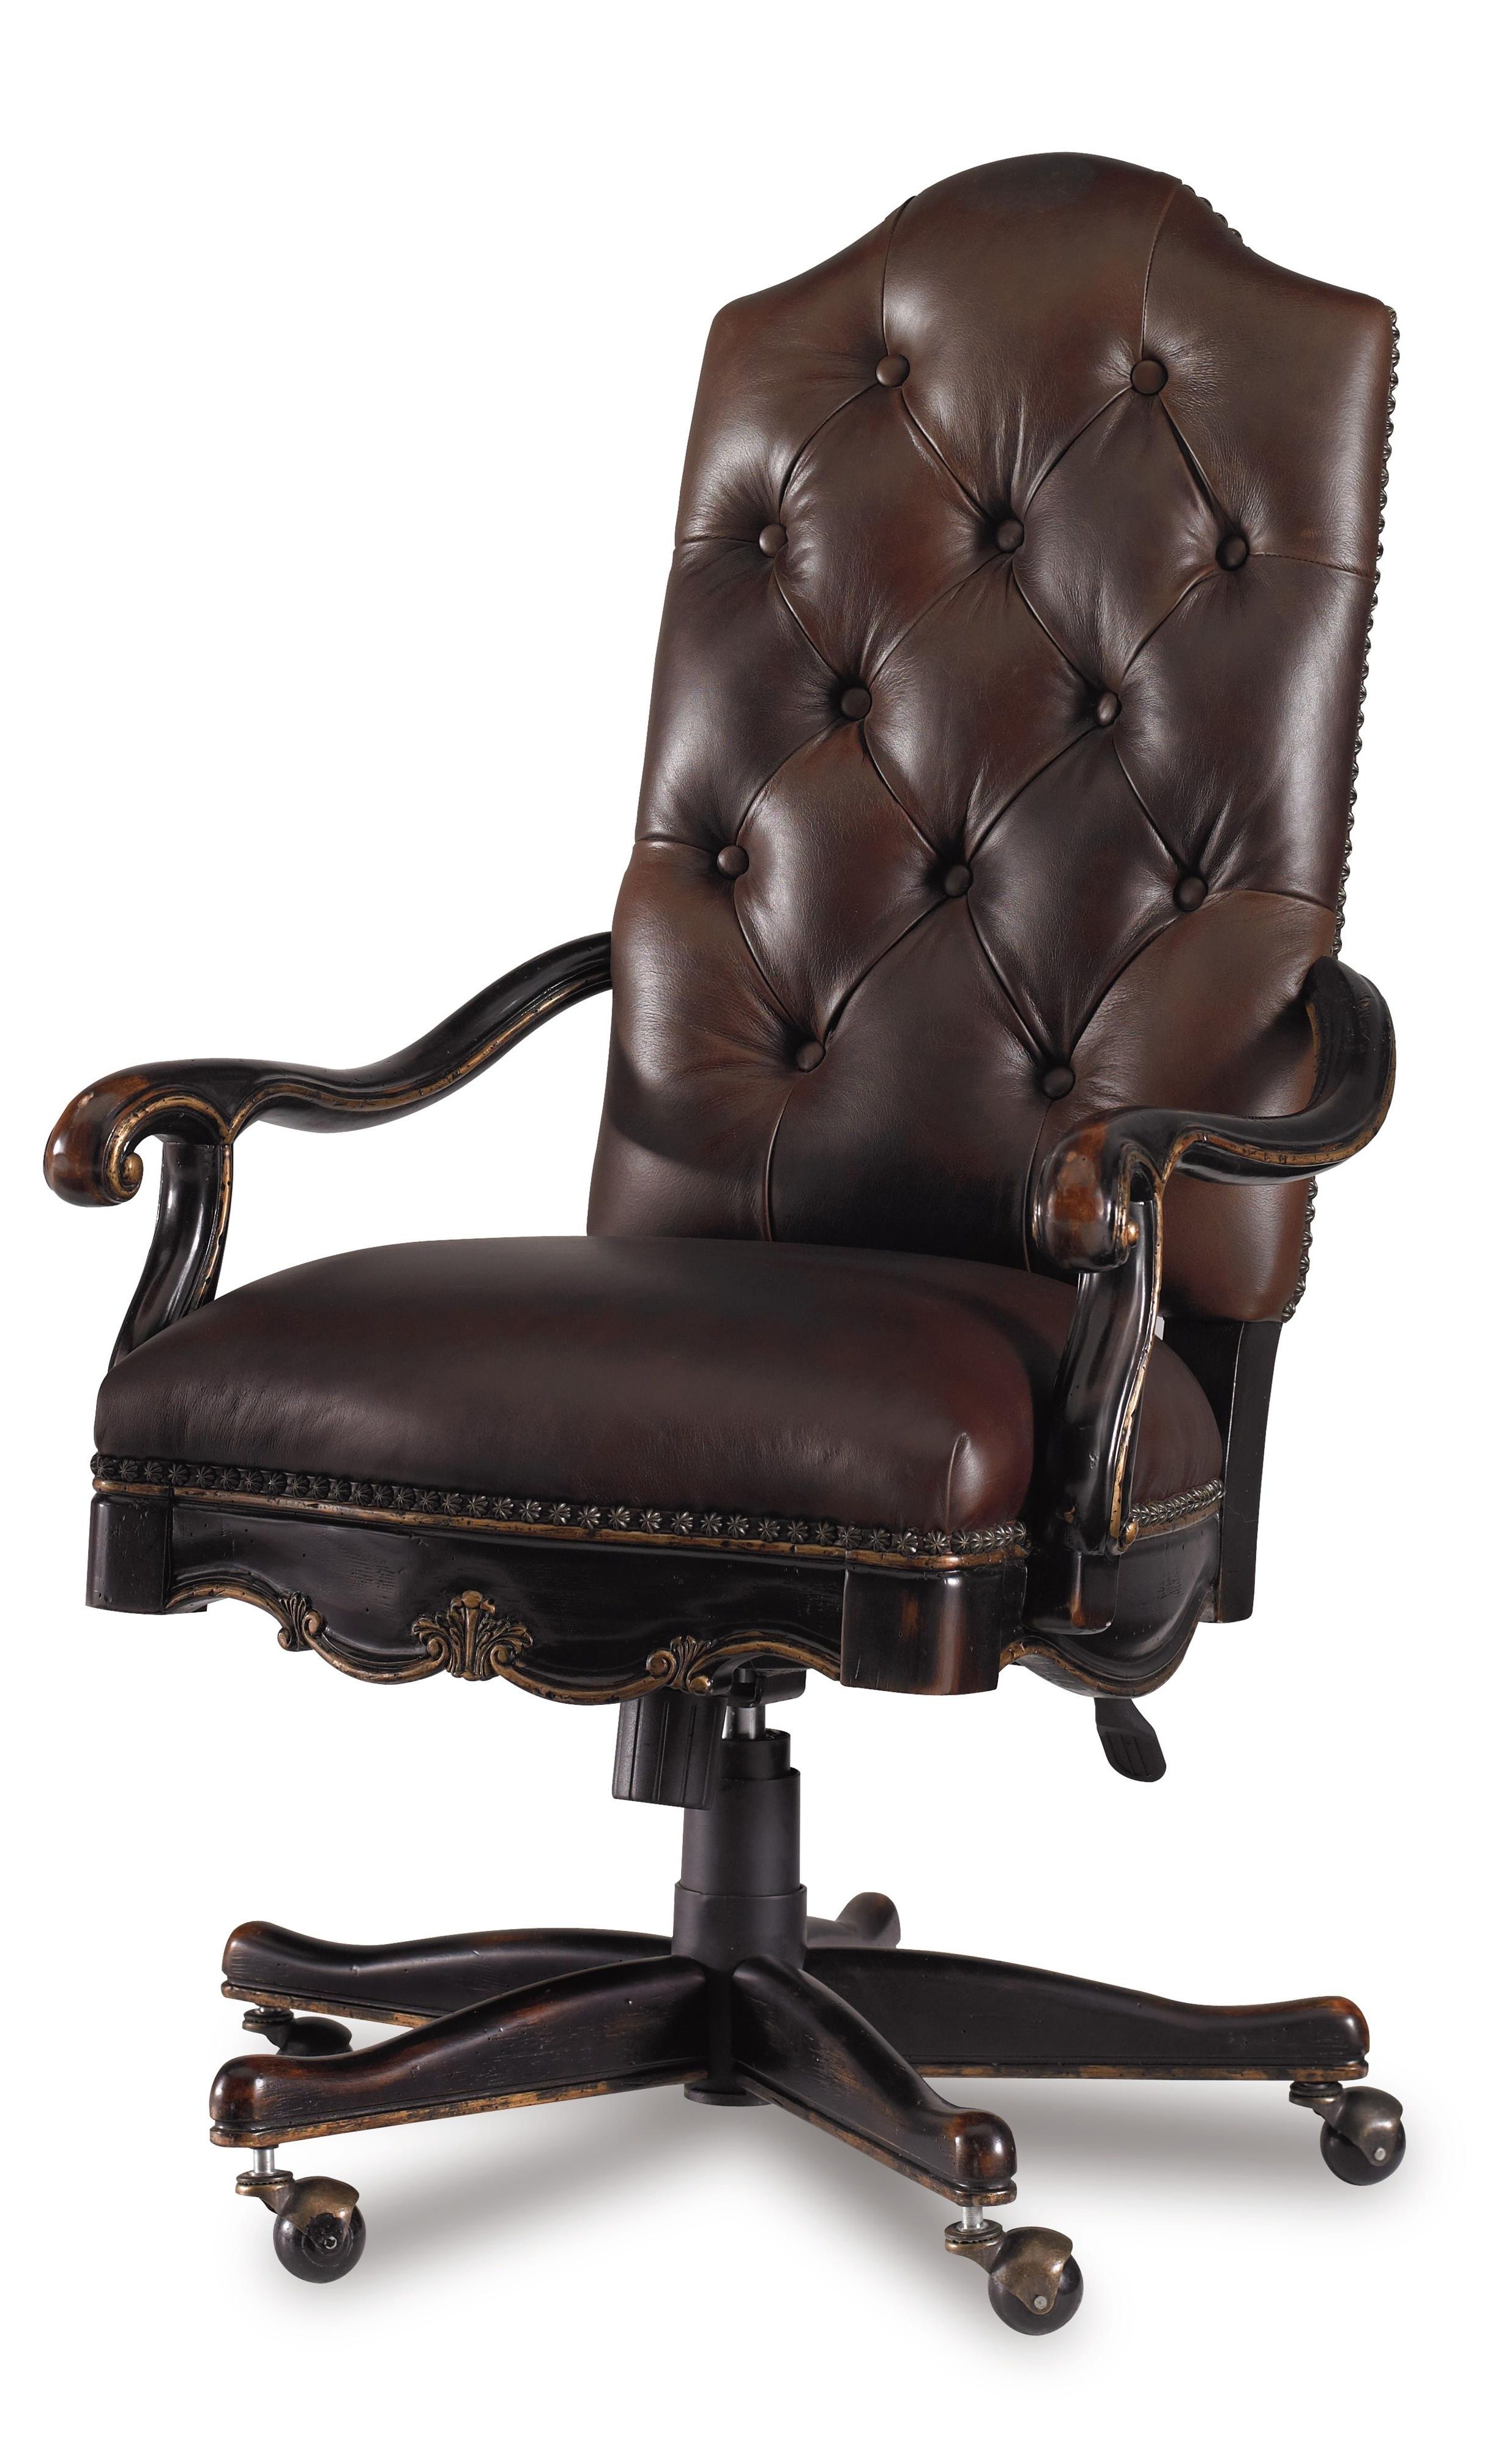 Newest Hooker Furniture Grandover Tufted Leather Executive Office Chair Regarding Red Leather Executive Office Chairs (View 8 of 20)